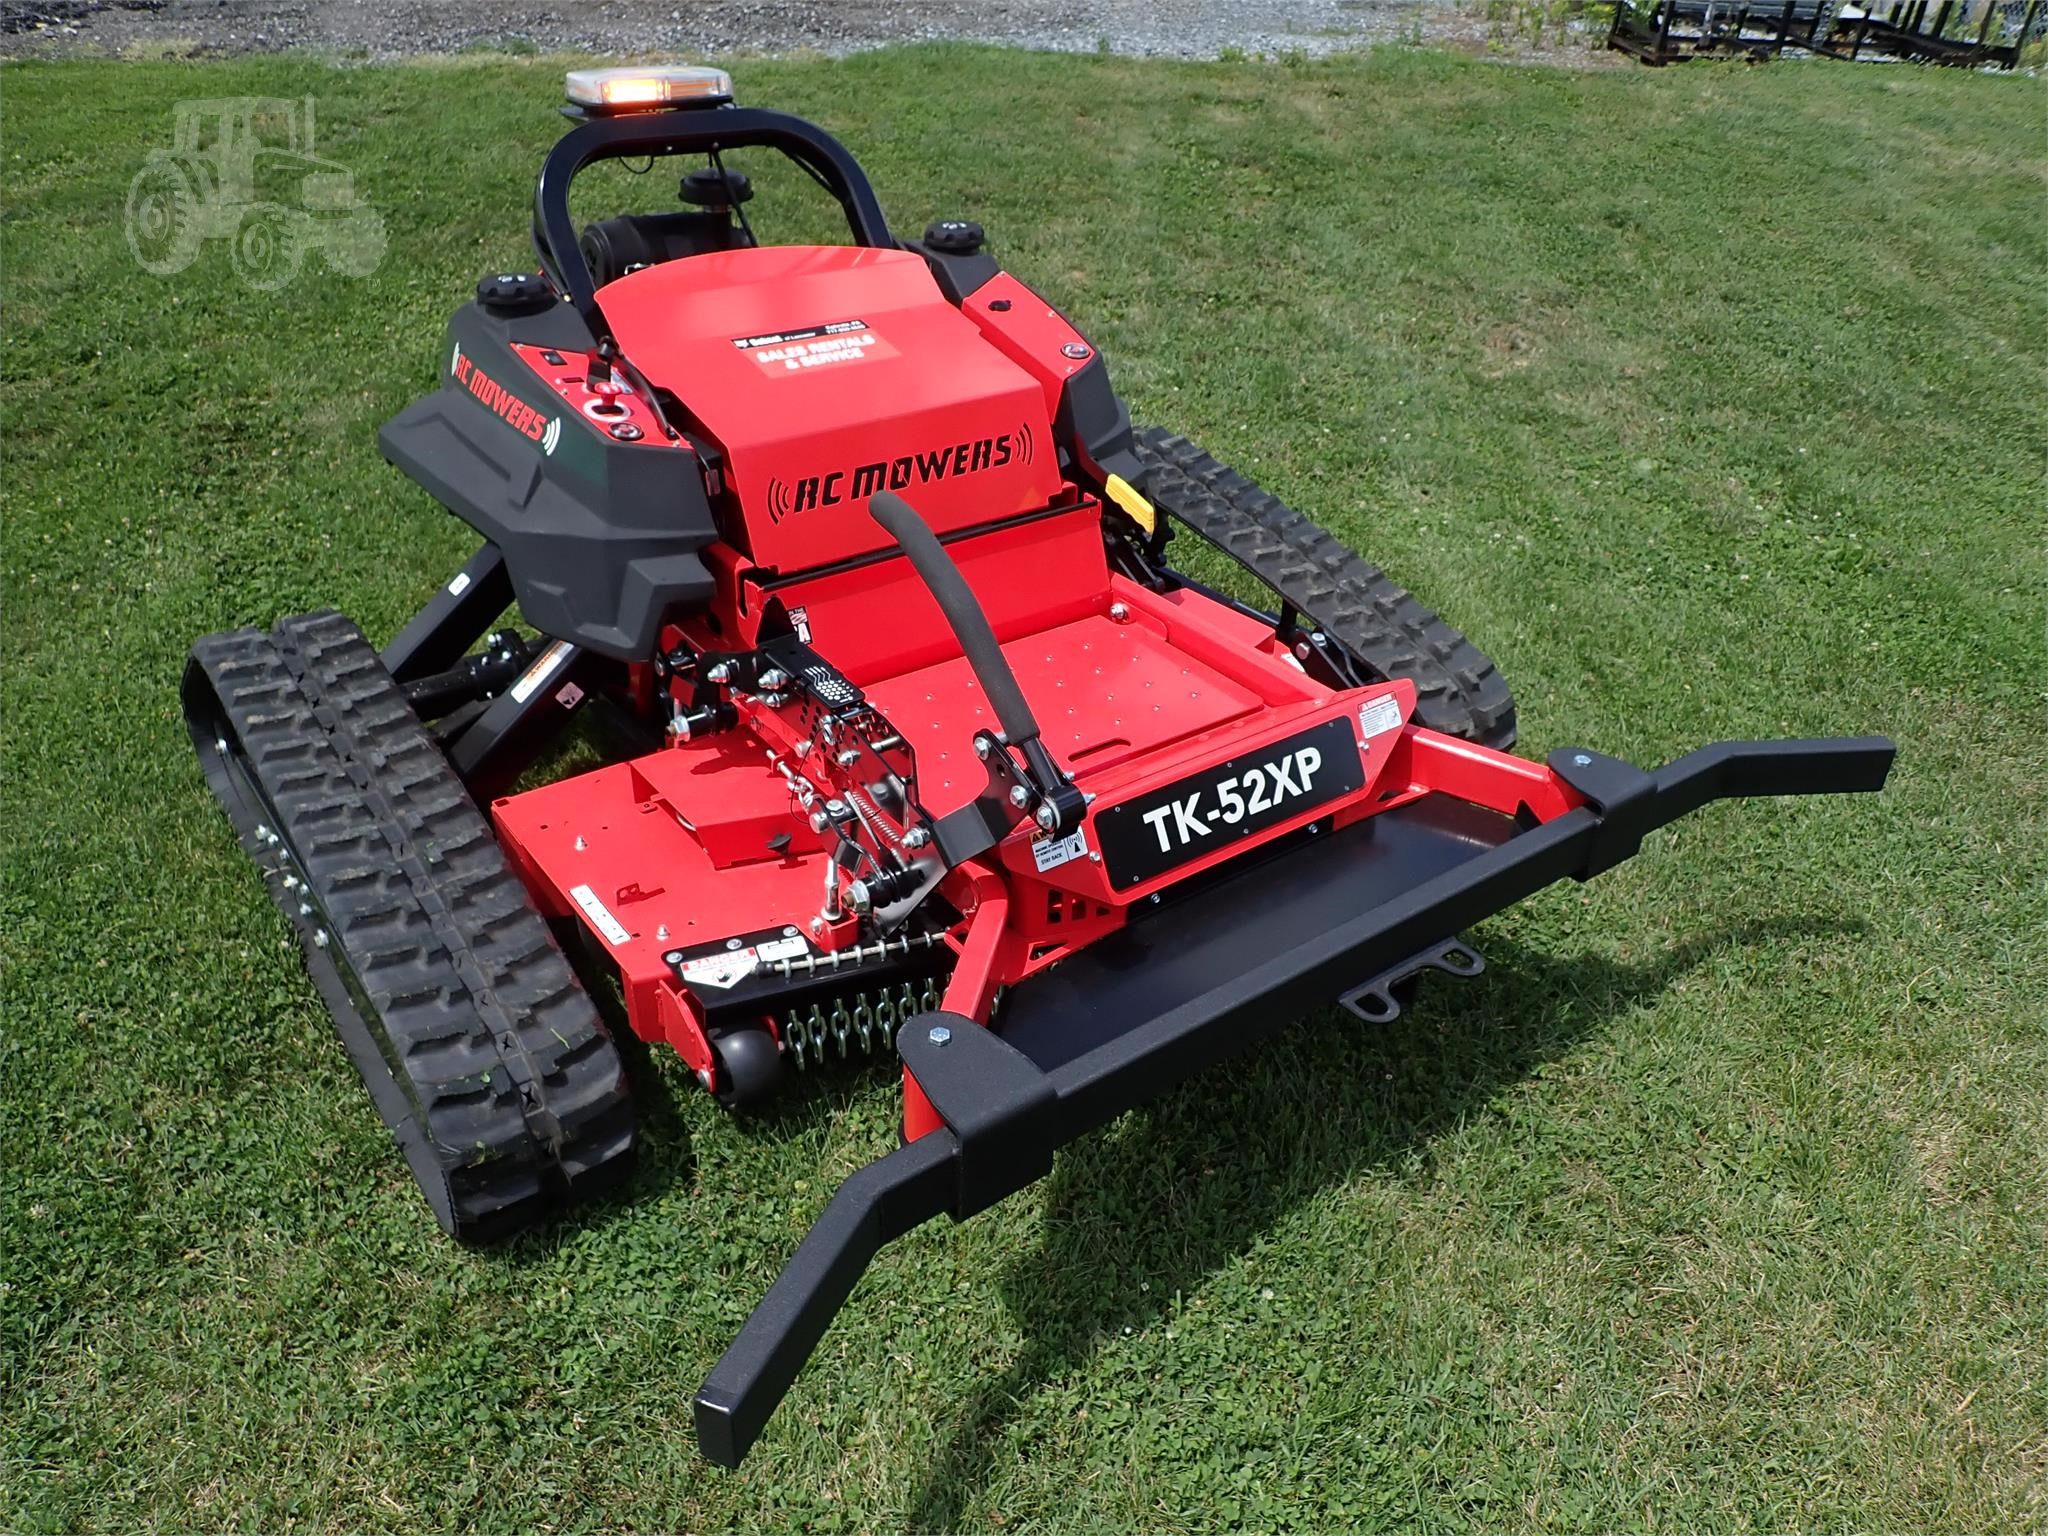 Rc Mowers Tk 52xp For Sale 2 Listings Tractorhouse Com Page 1 Of 1